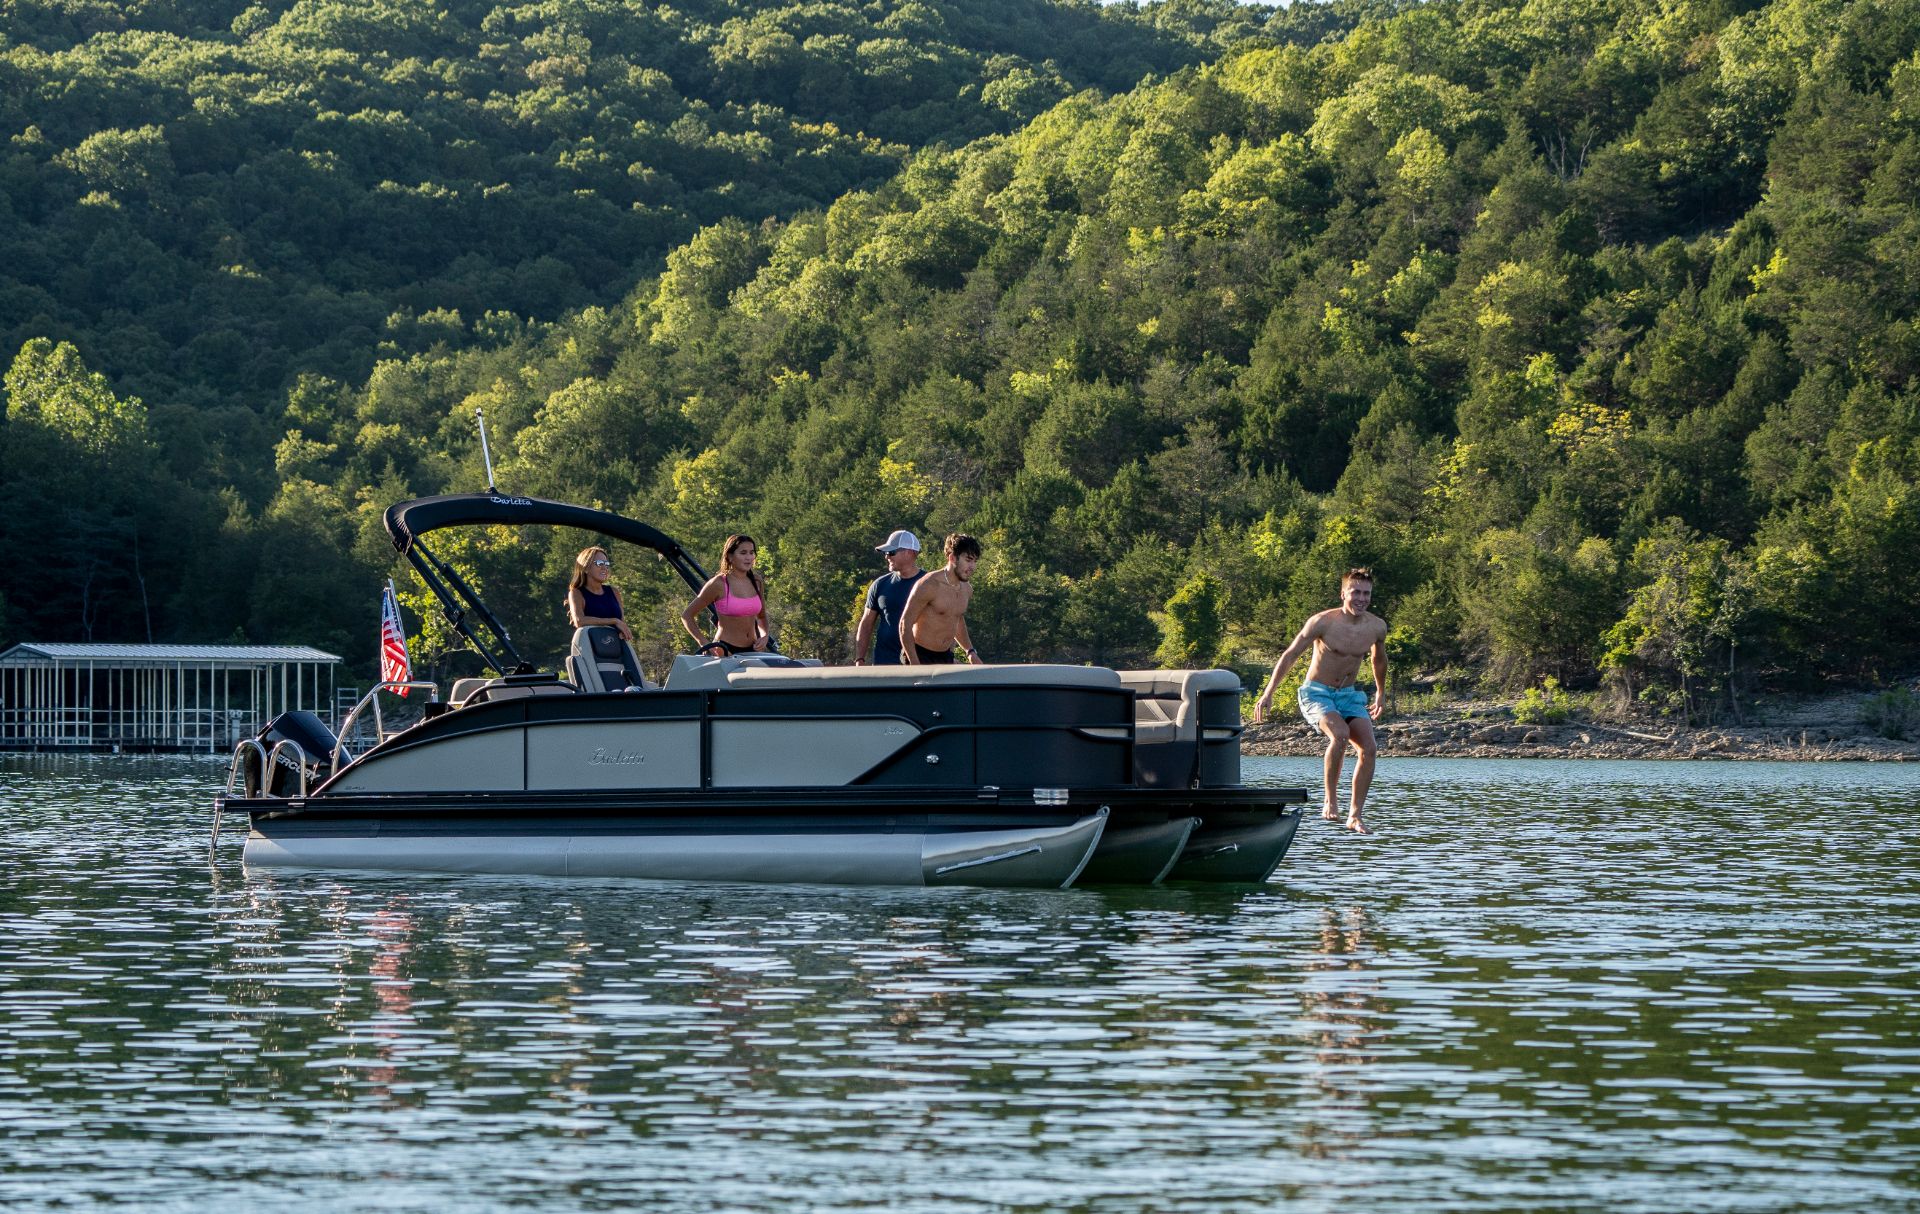 Go Boating: The Best Outdoor Activity